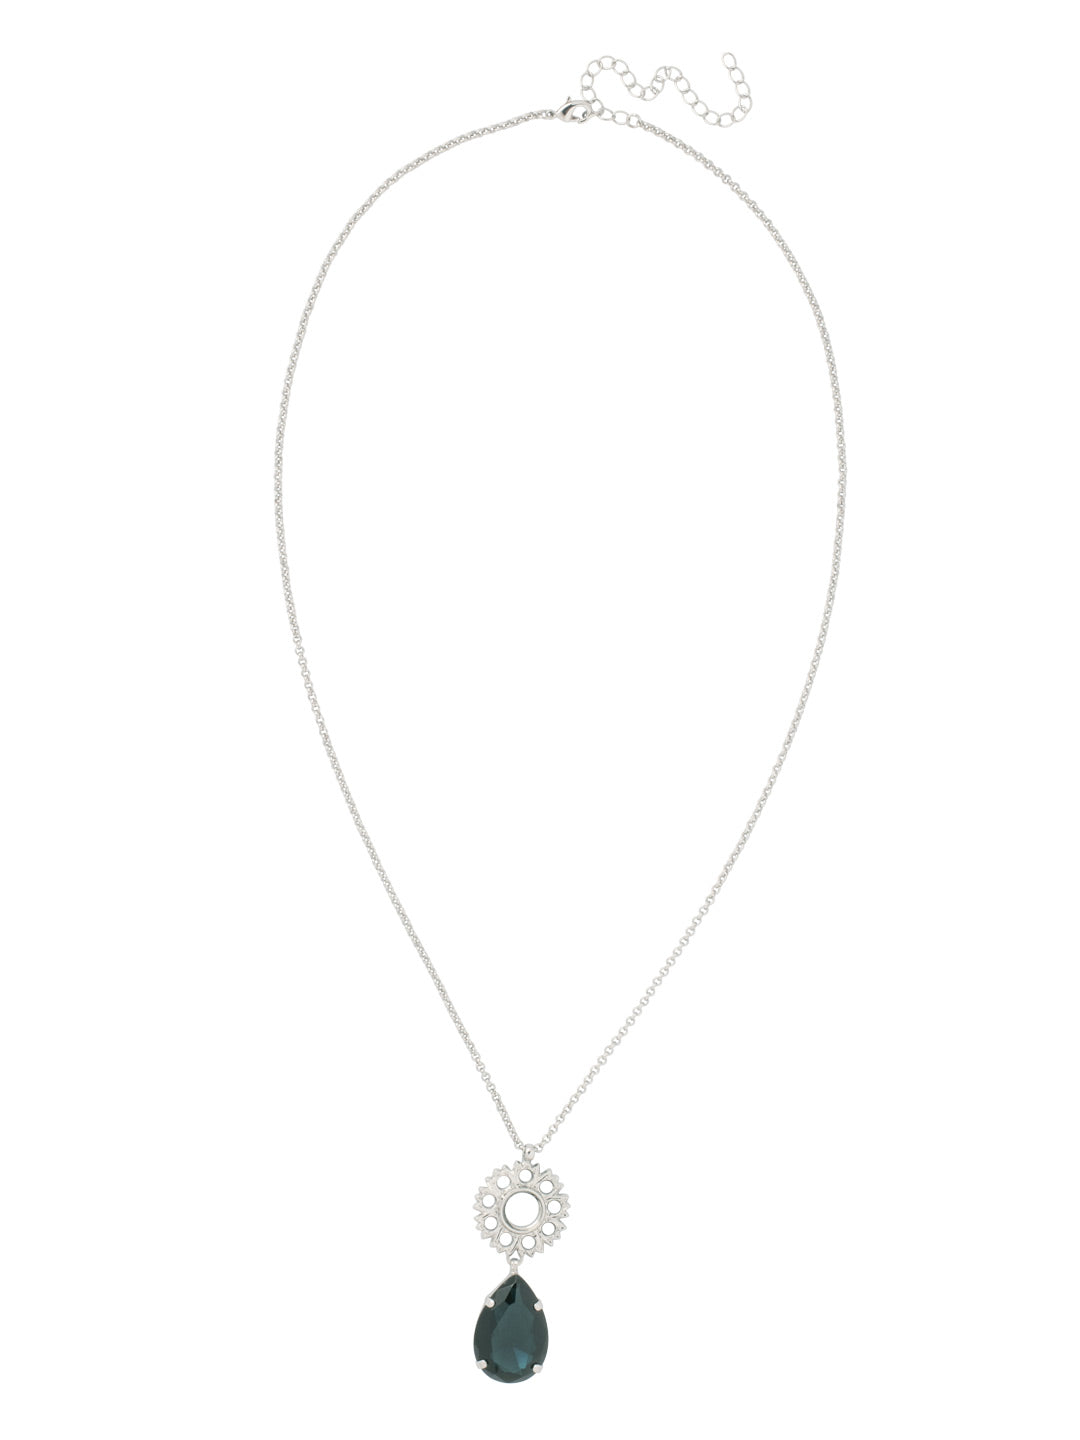 Heather Long Necklace - NFL16PDASP - <p>The Heather Long Necklace features a pear-cut crystal and metal detailed ring pendant on a long adjustable chain, secured by a lobster claw clasp. From Sorrelli's Aspen SKY collection in our Palladium finish.</p>